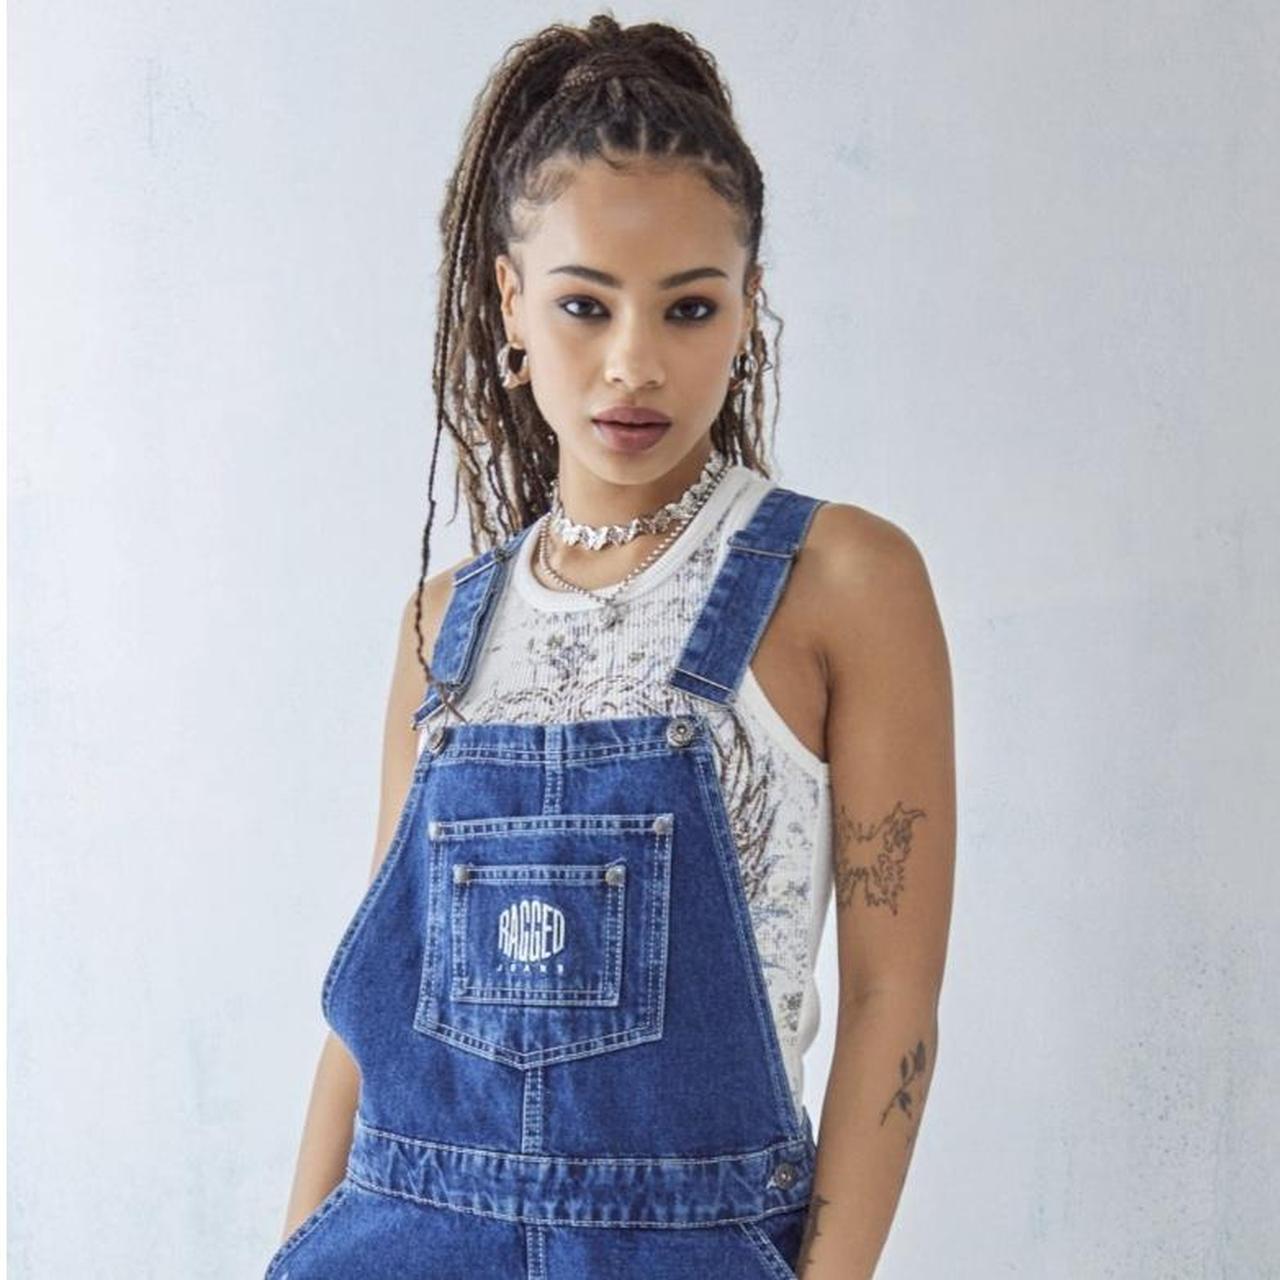 Ragged Blue Dungarees